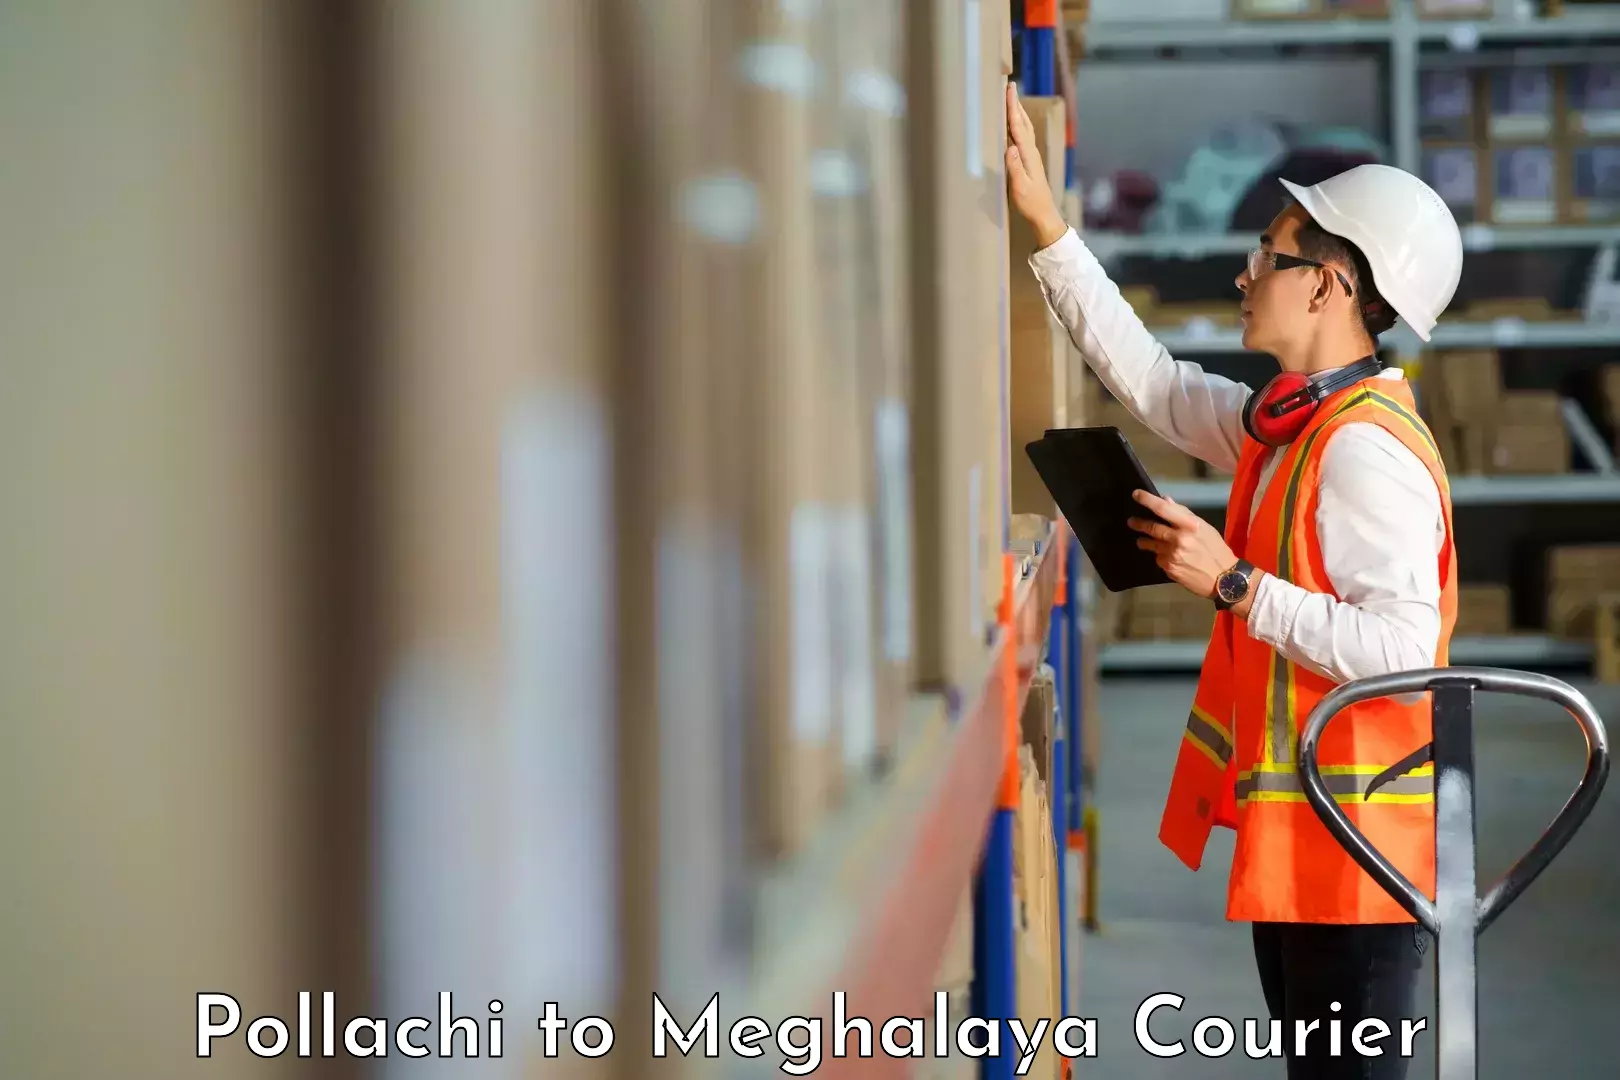 Multi-national courier services Pollachi to Shillong